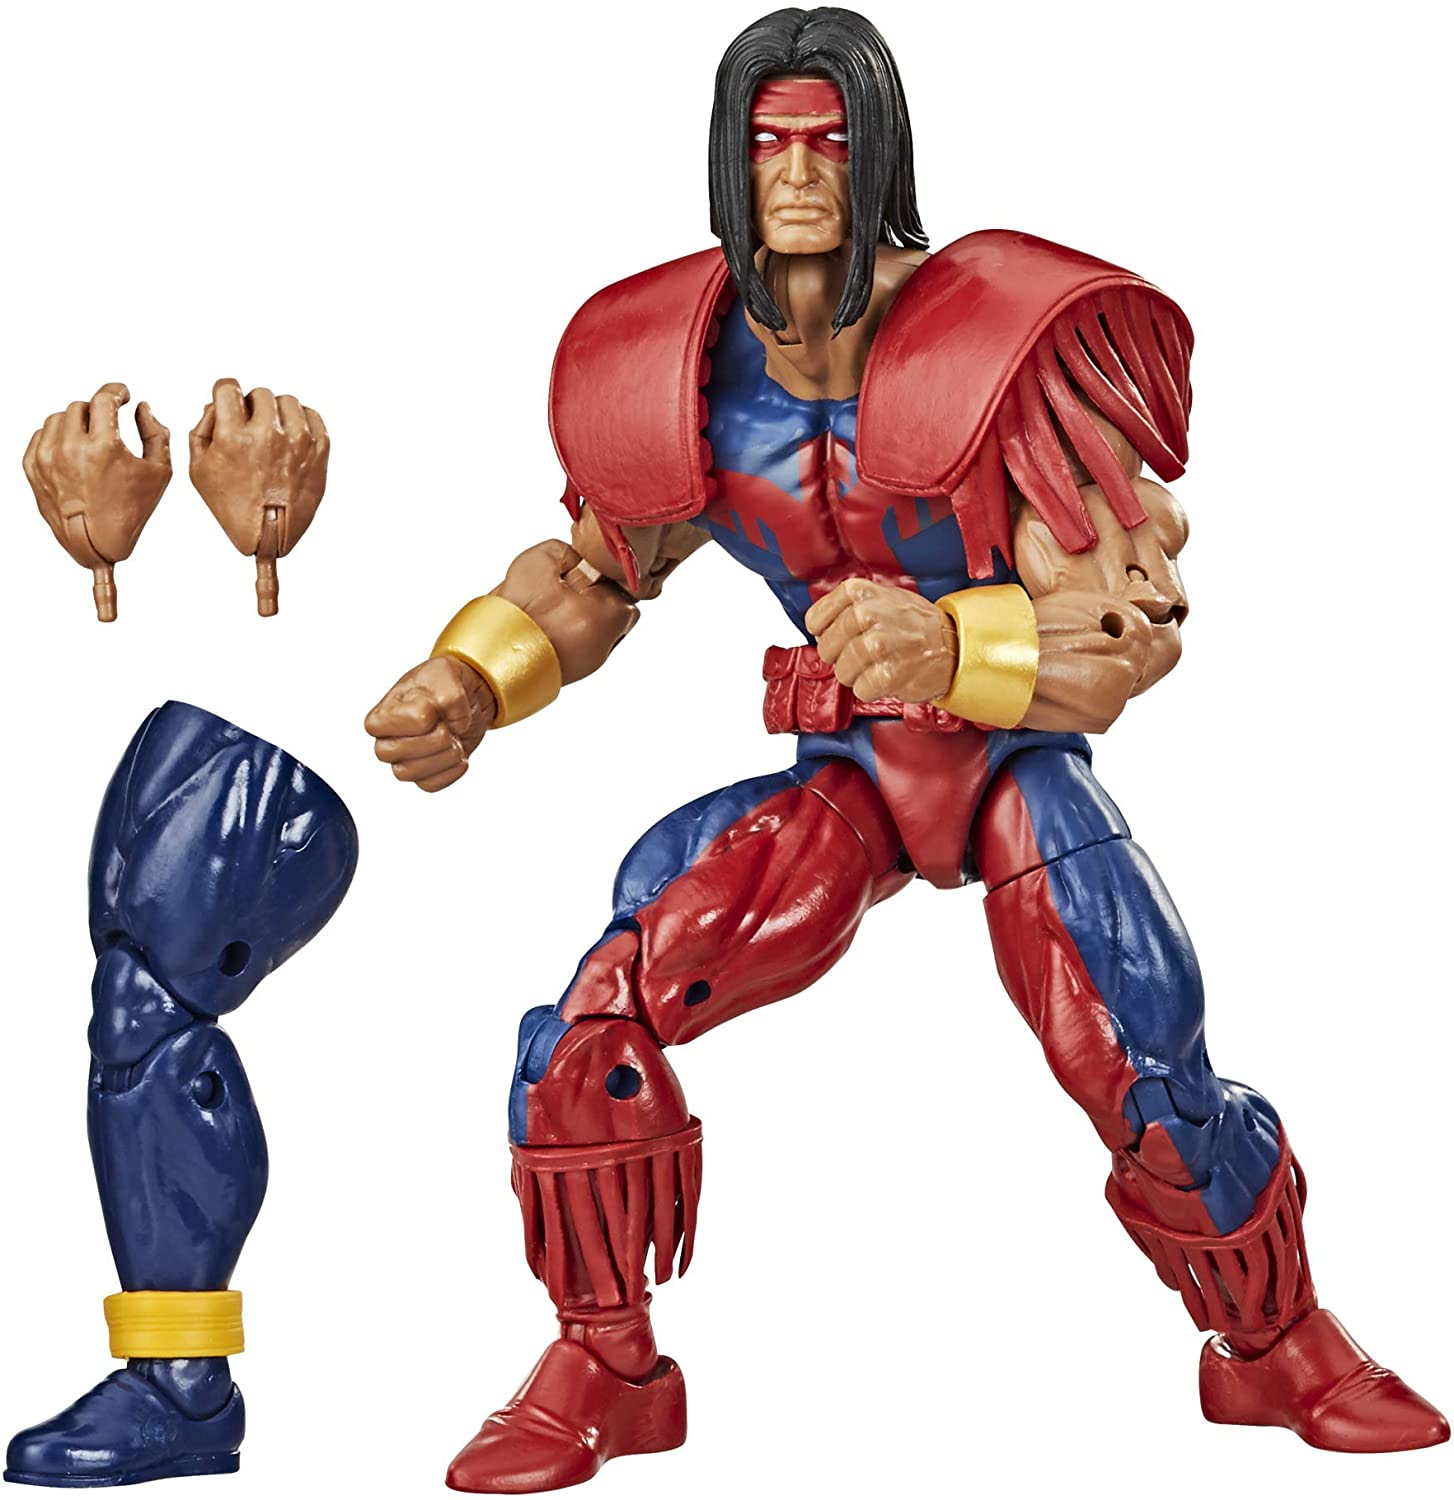 Image of Hasbro Marvel Legends Series Collection 6-inch Marvel’s Warpath Action Figure Toy Premium Design and 2 Accessories